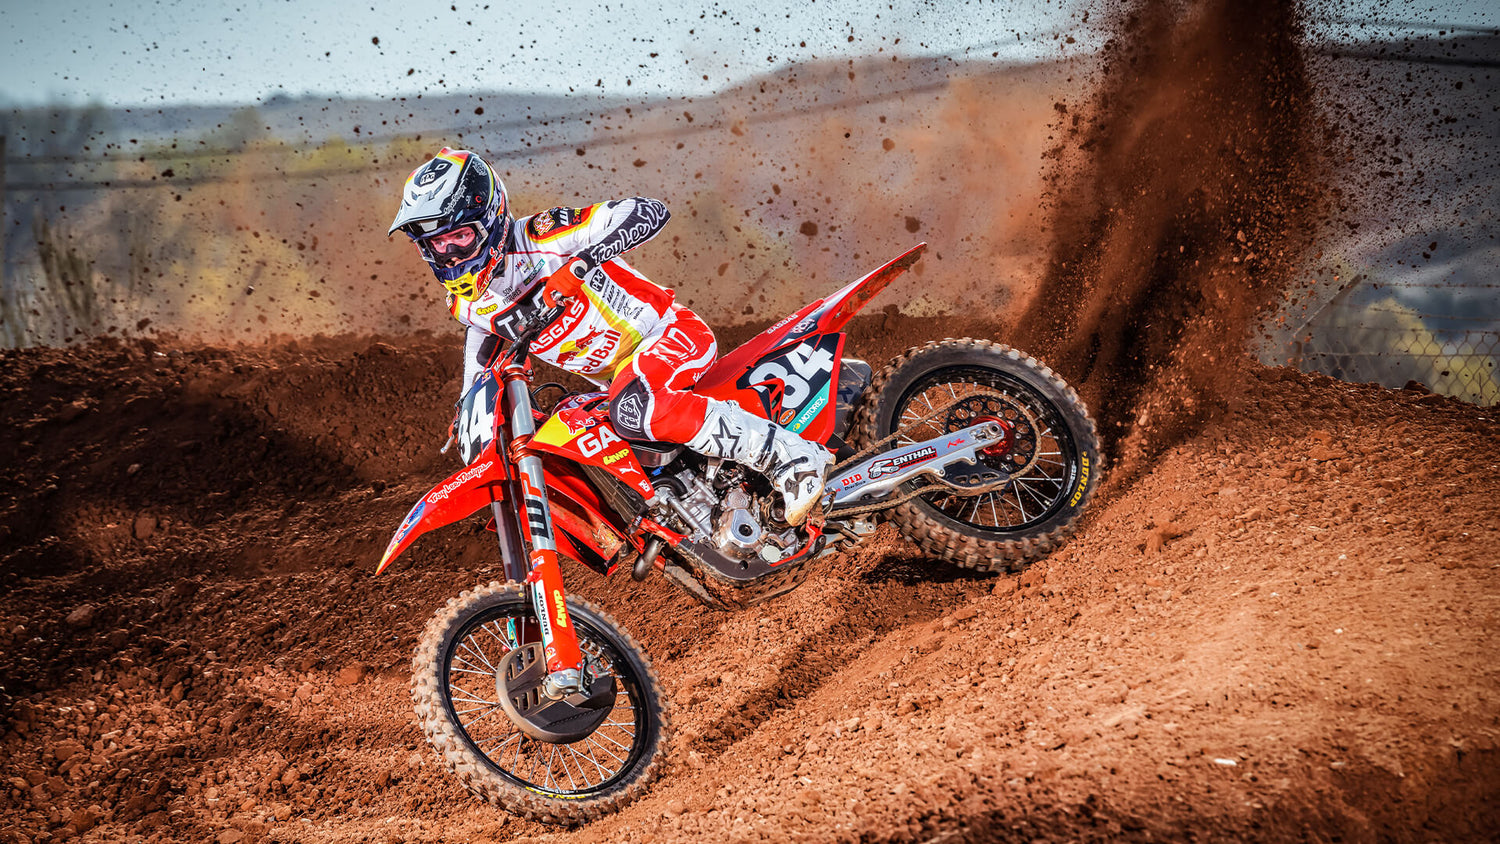 SE Ultra - Troy Lee Designs Moto rider at the track